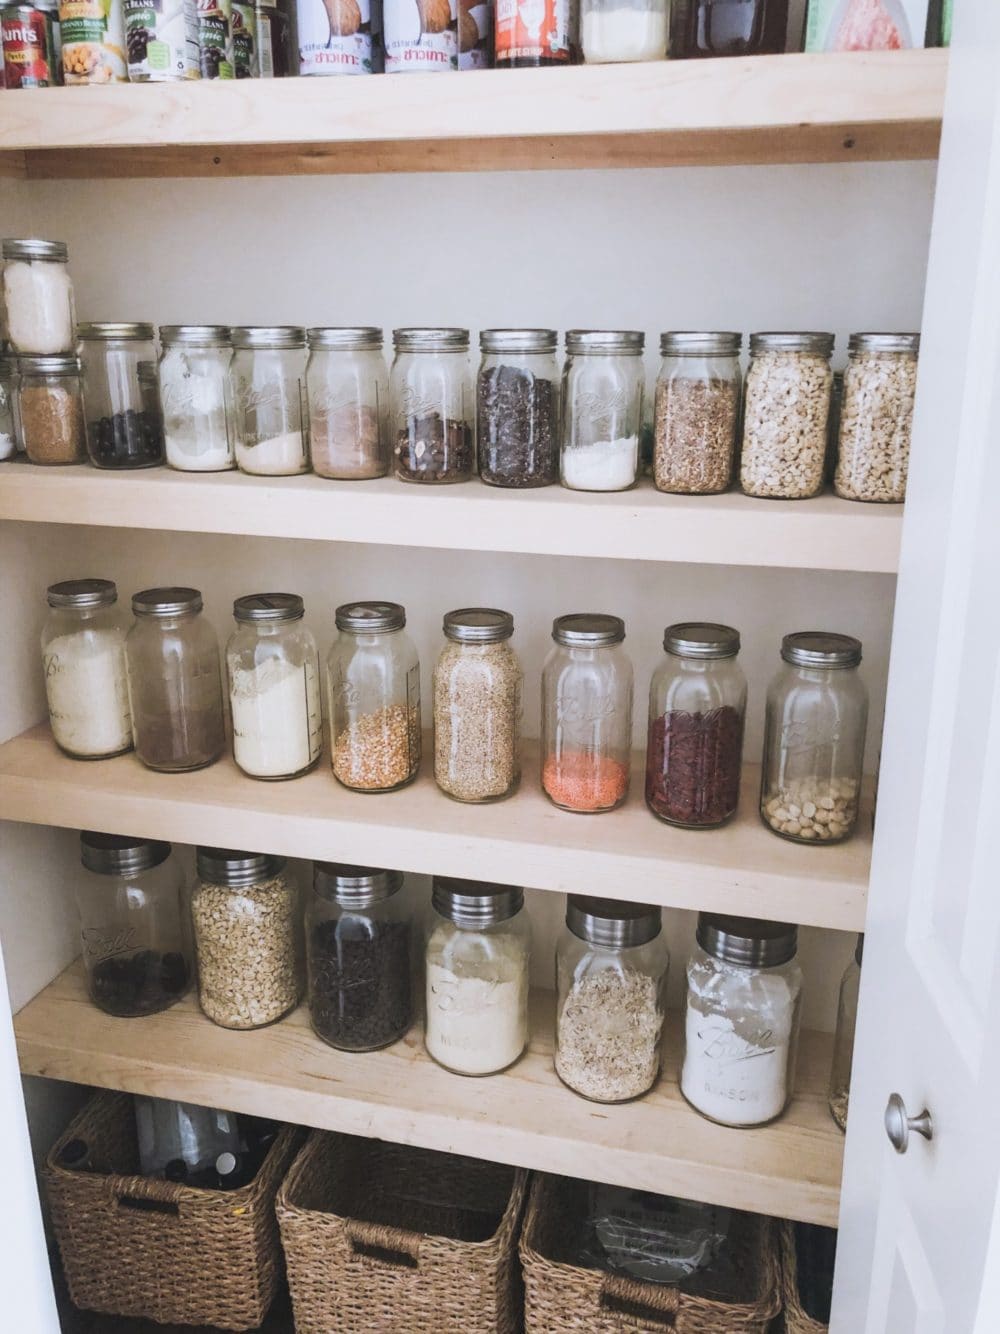 8 Best Reusable Food Containers For Zero Waste Kitchen Storage